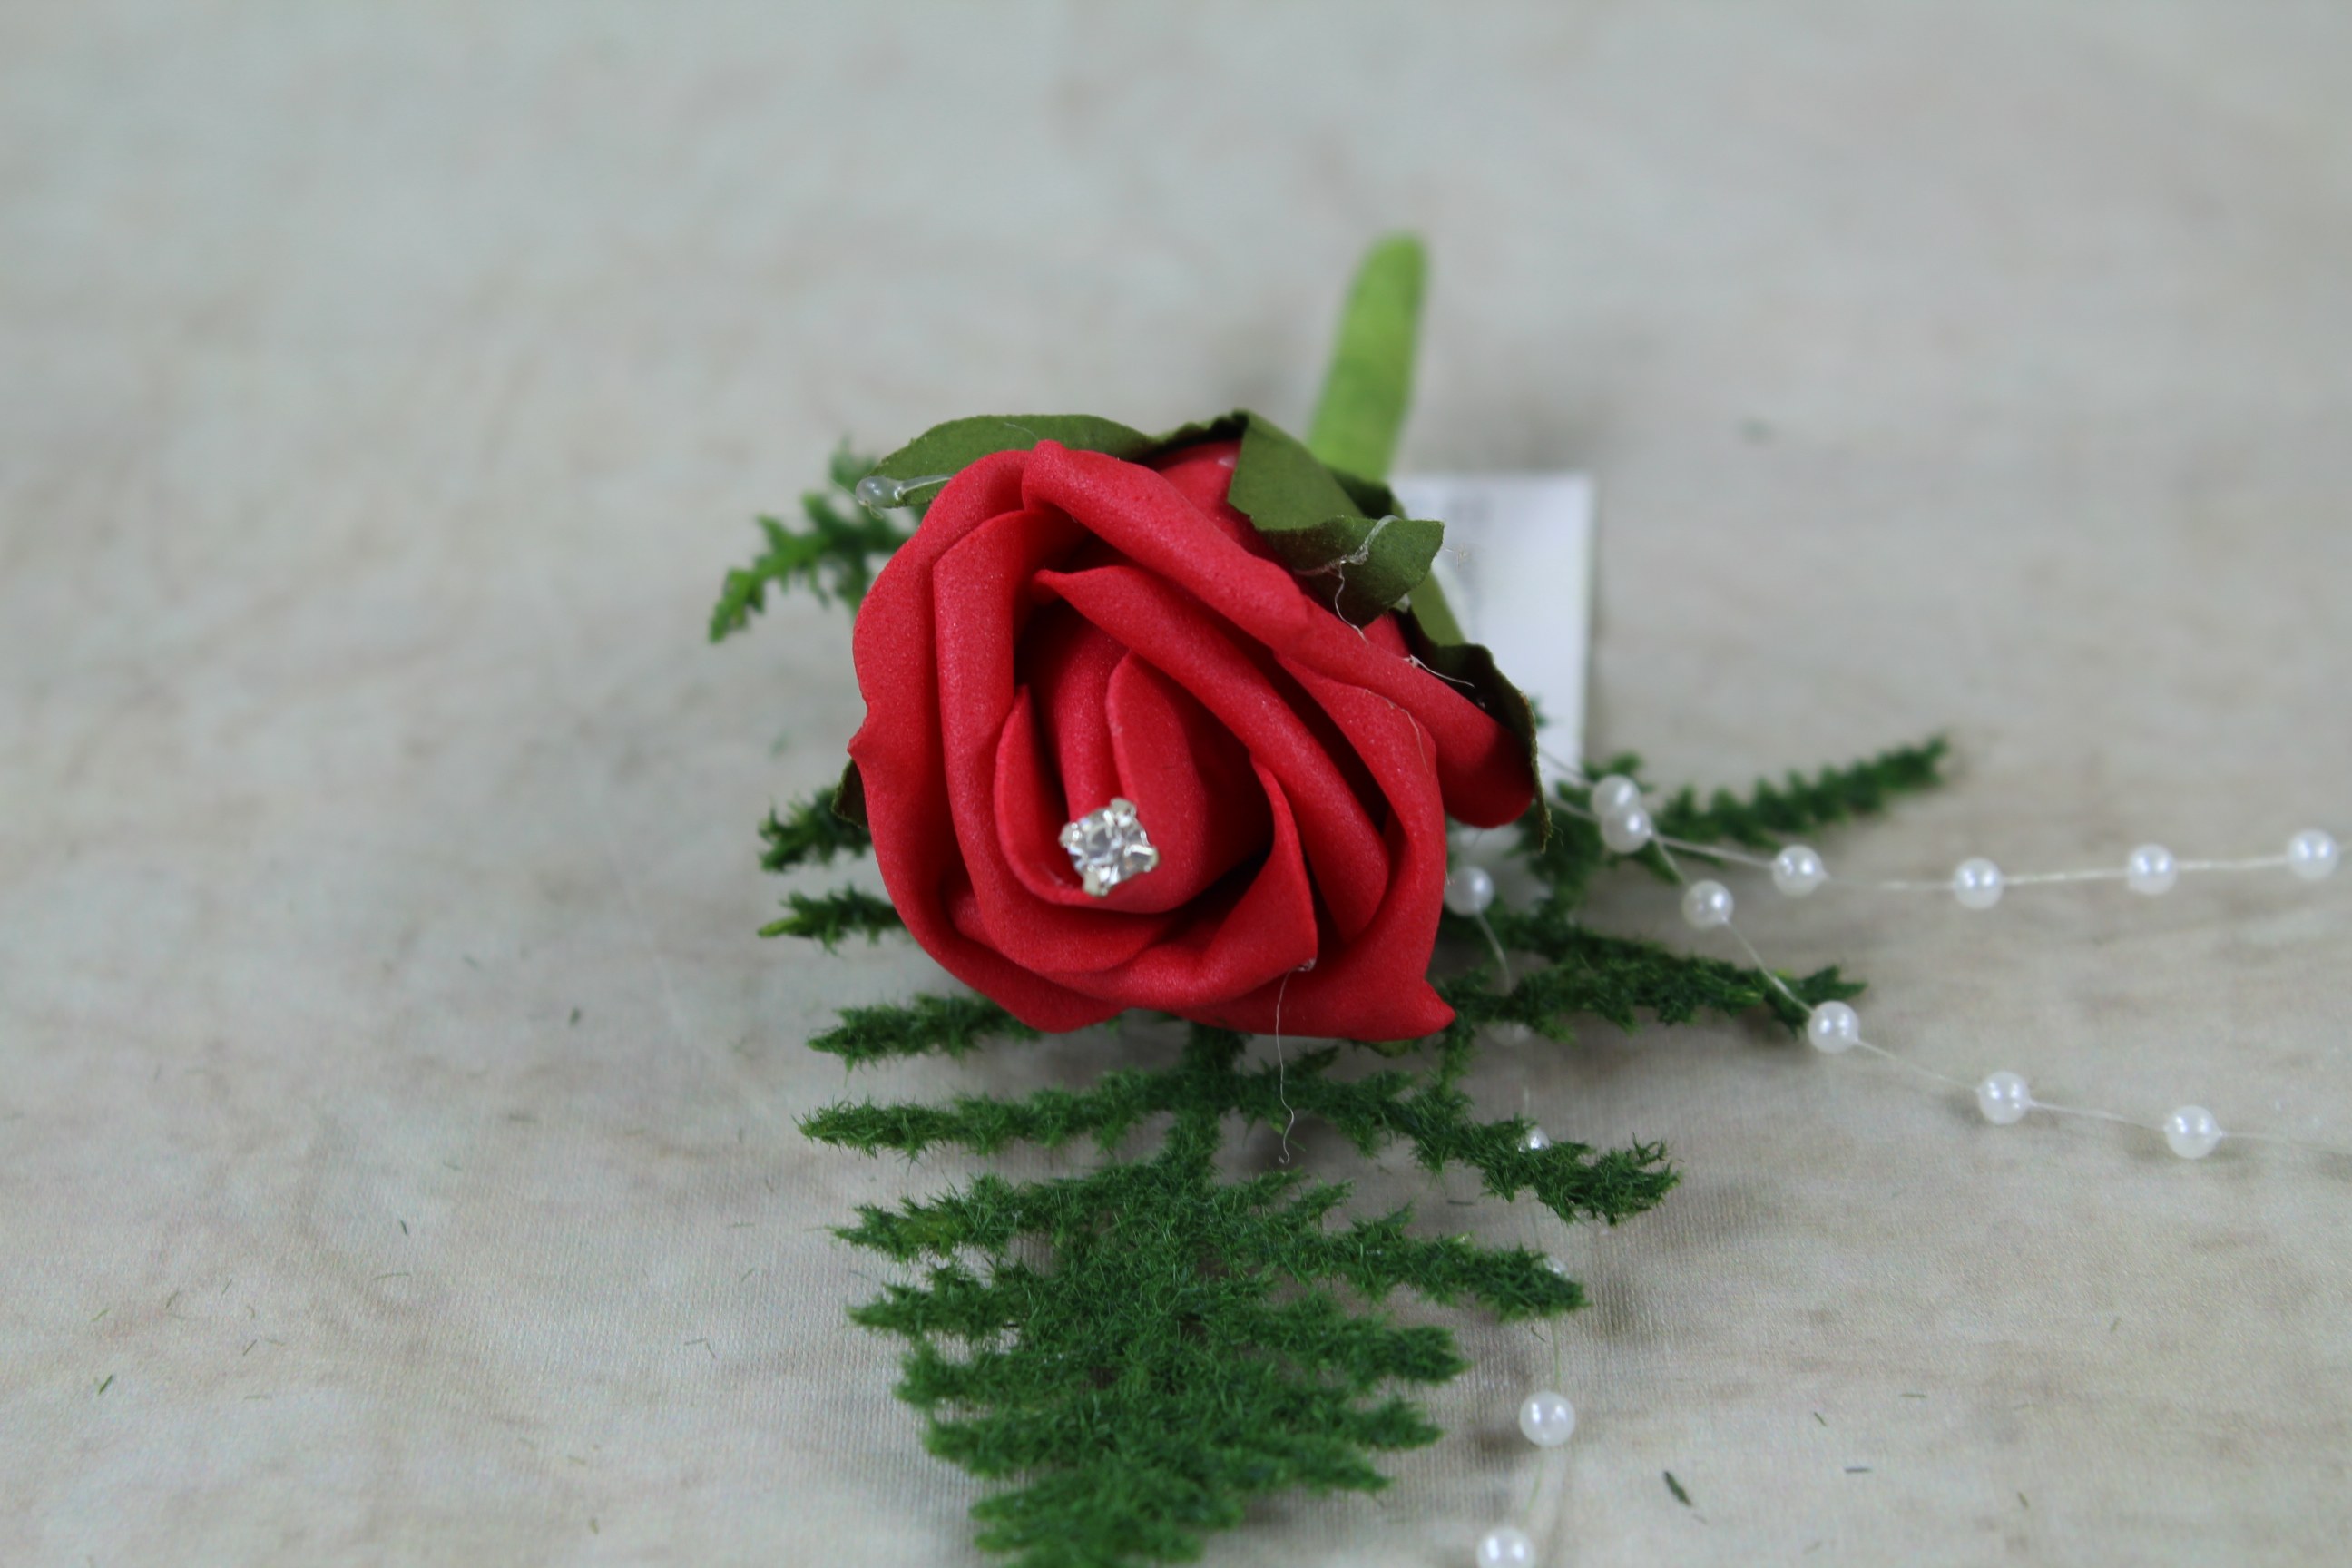 36 x Foam Rose Corsages With Rhinestone Pearls